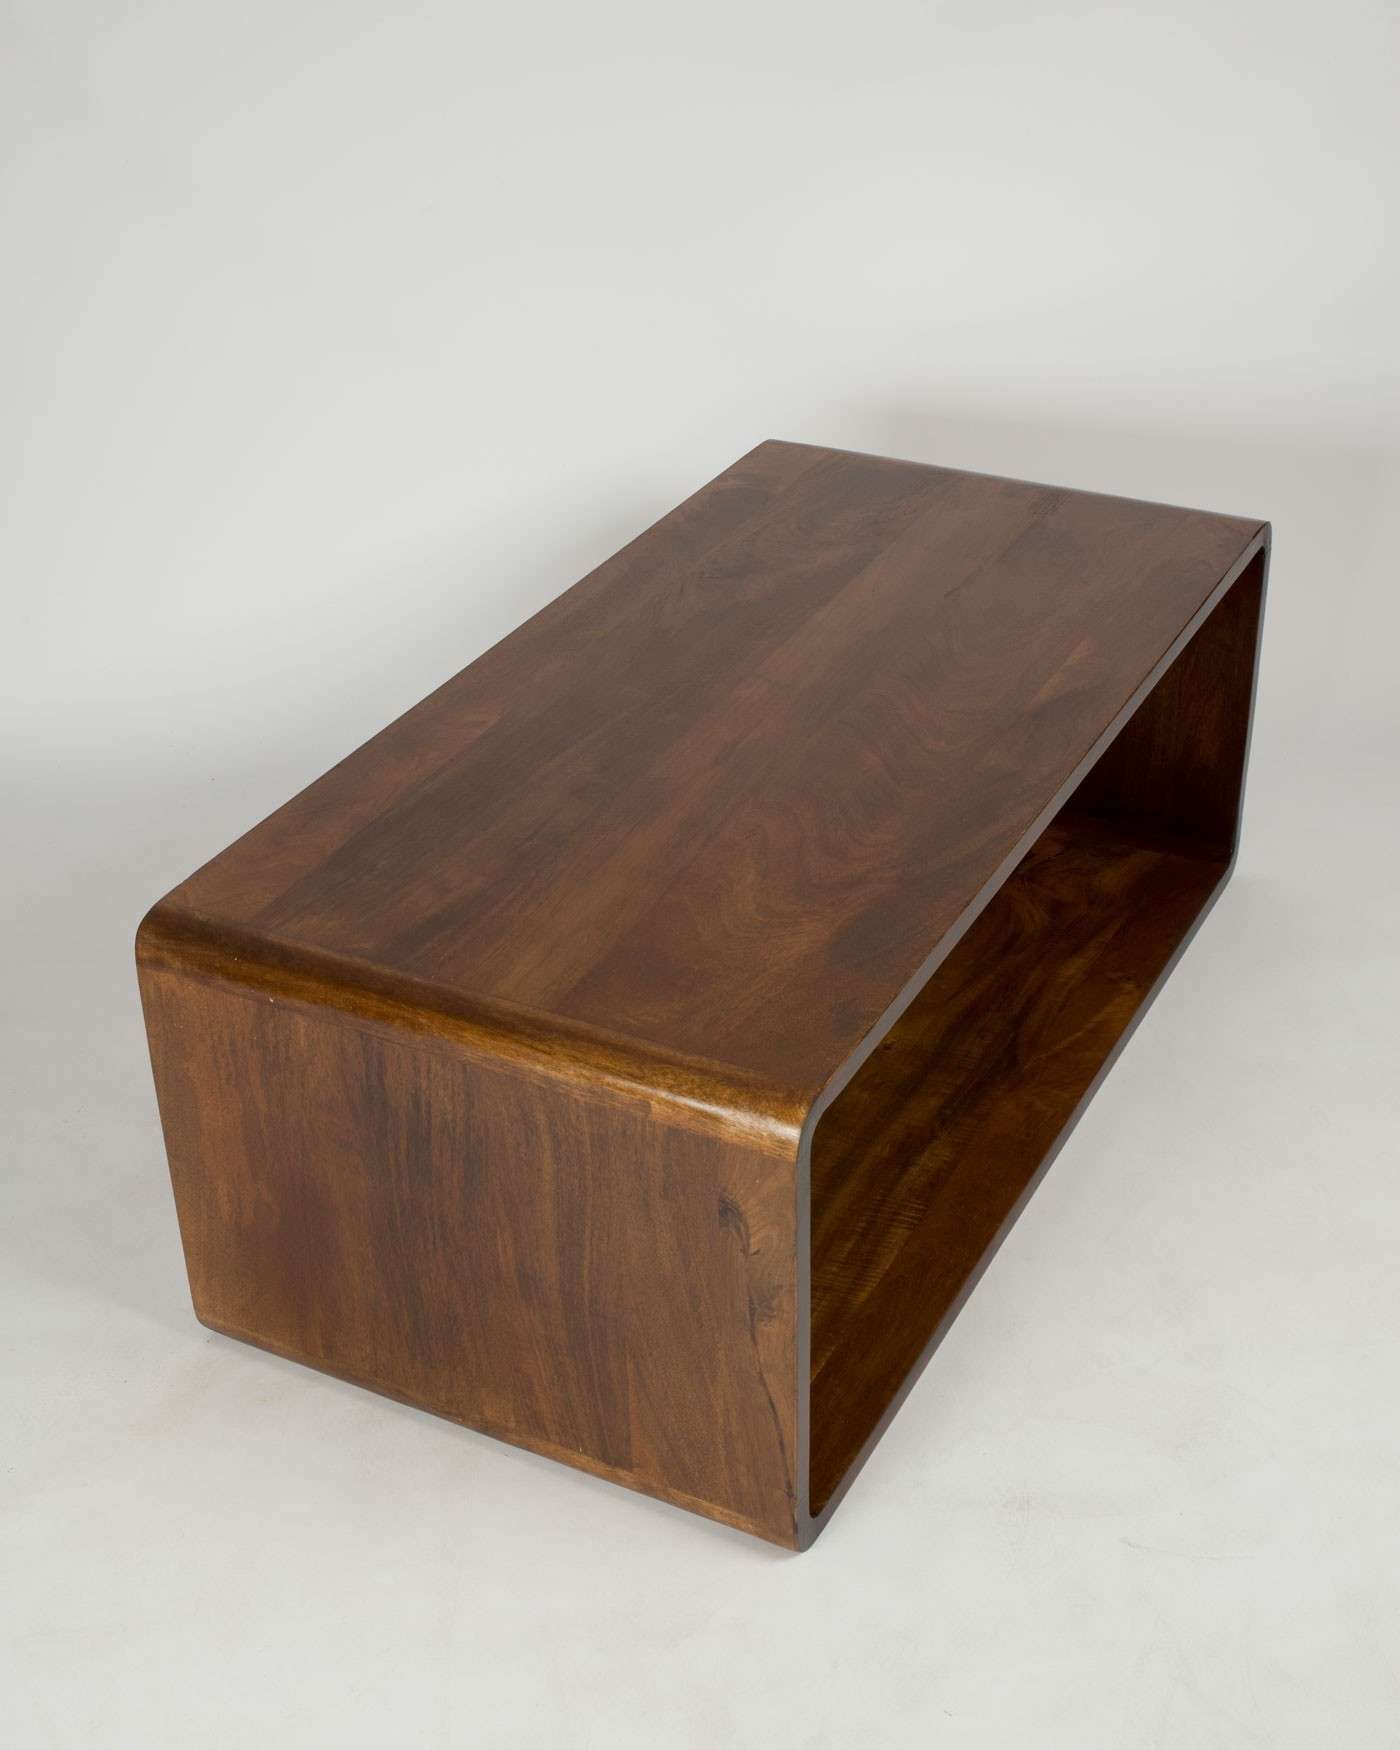 Latest Solid Wood Coffee Tables Intended For Coffee Table : Solid Wood Coffee Tables For Sale Cool Modern (View 11 of 20)